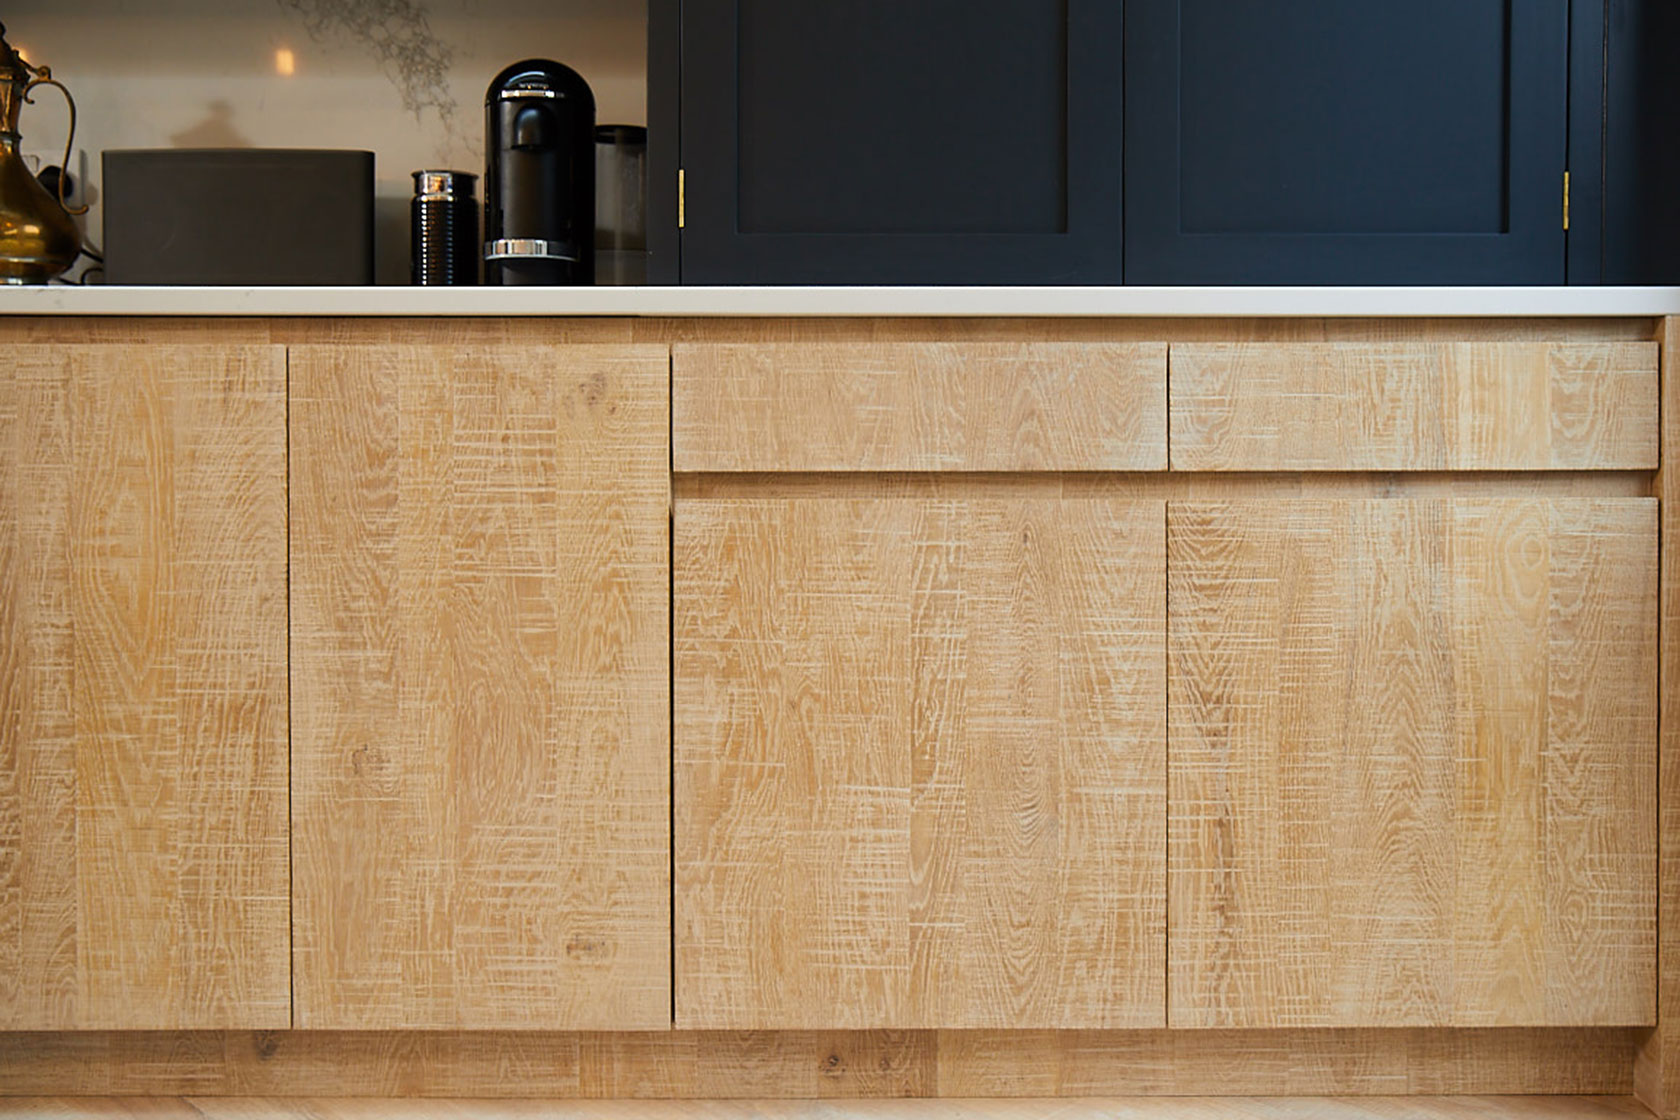 Limed oak kitchen base units with integrated bin for recycling and Caesarstone worktop